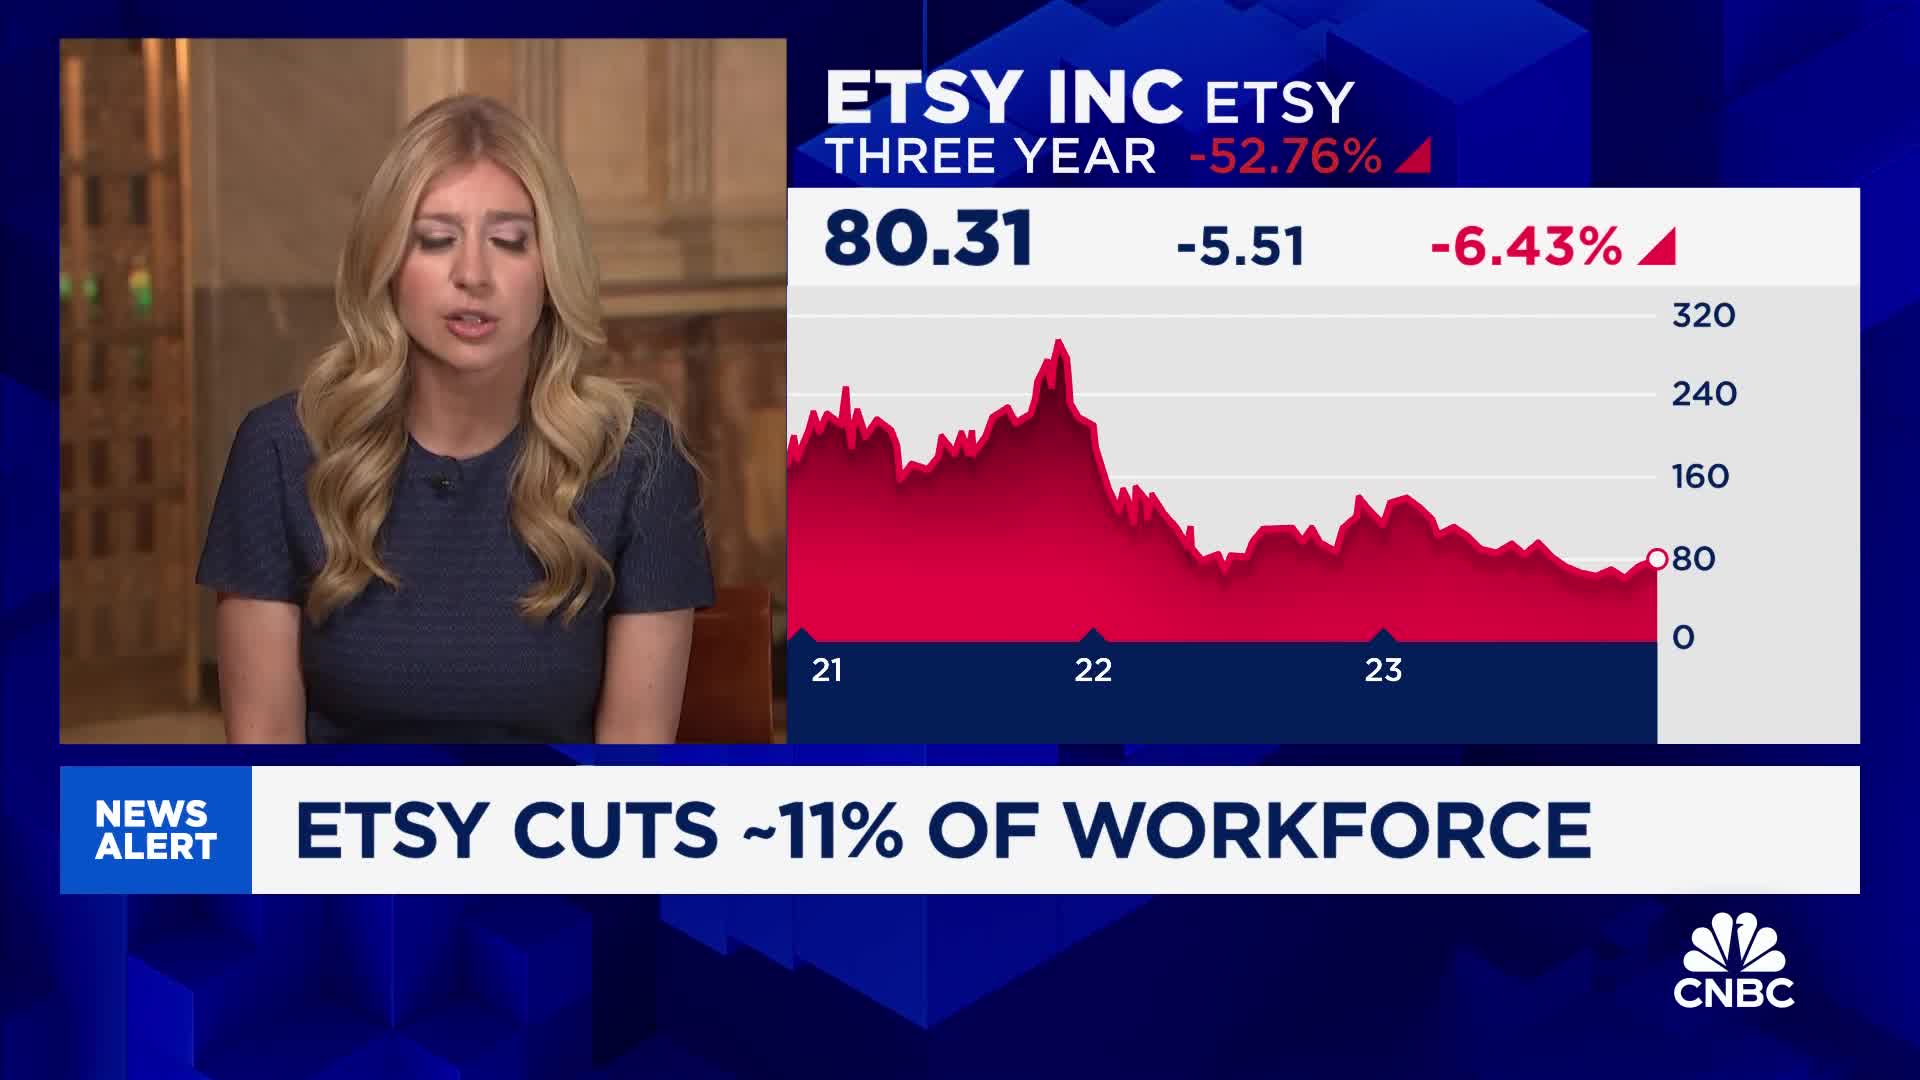 Etsy lays off 11% of its workforce